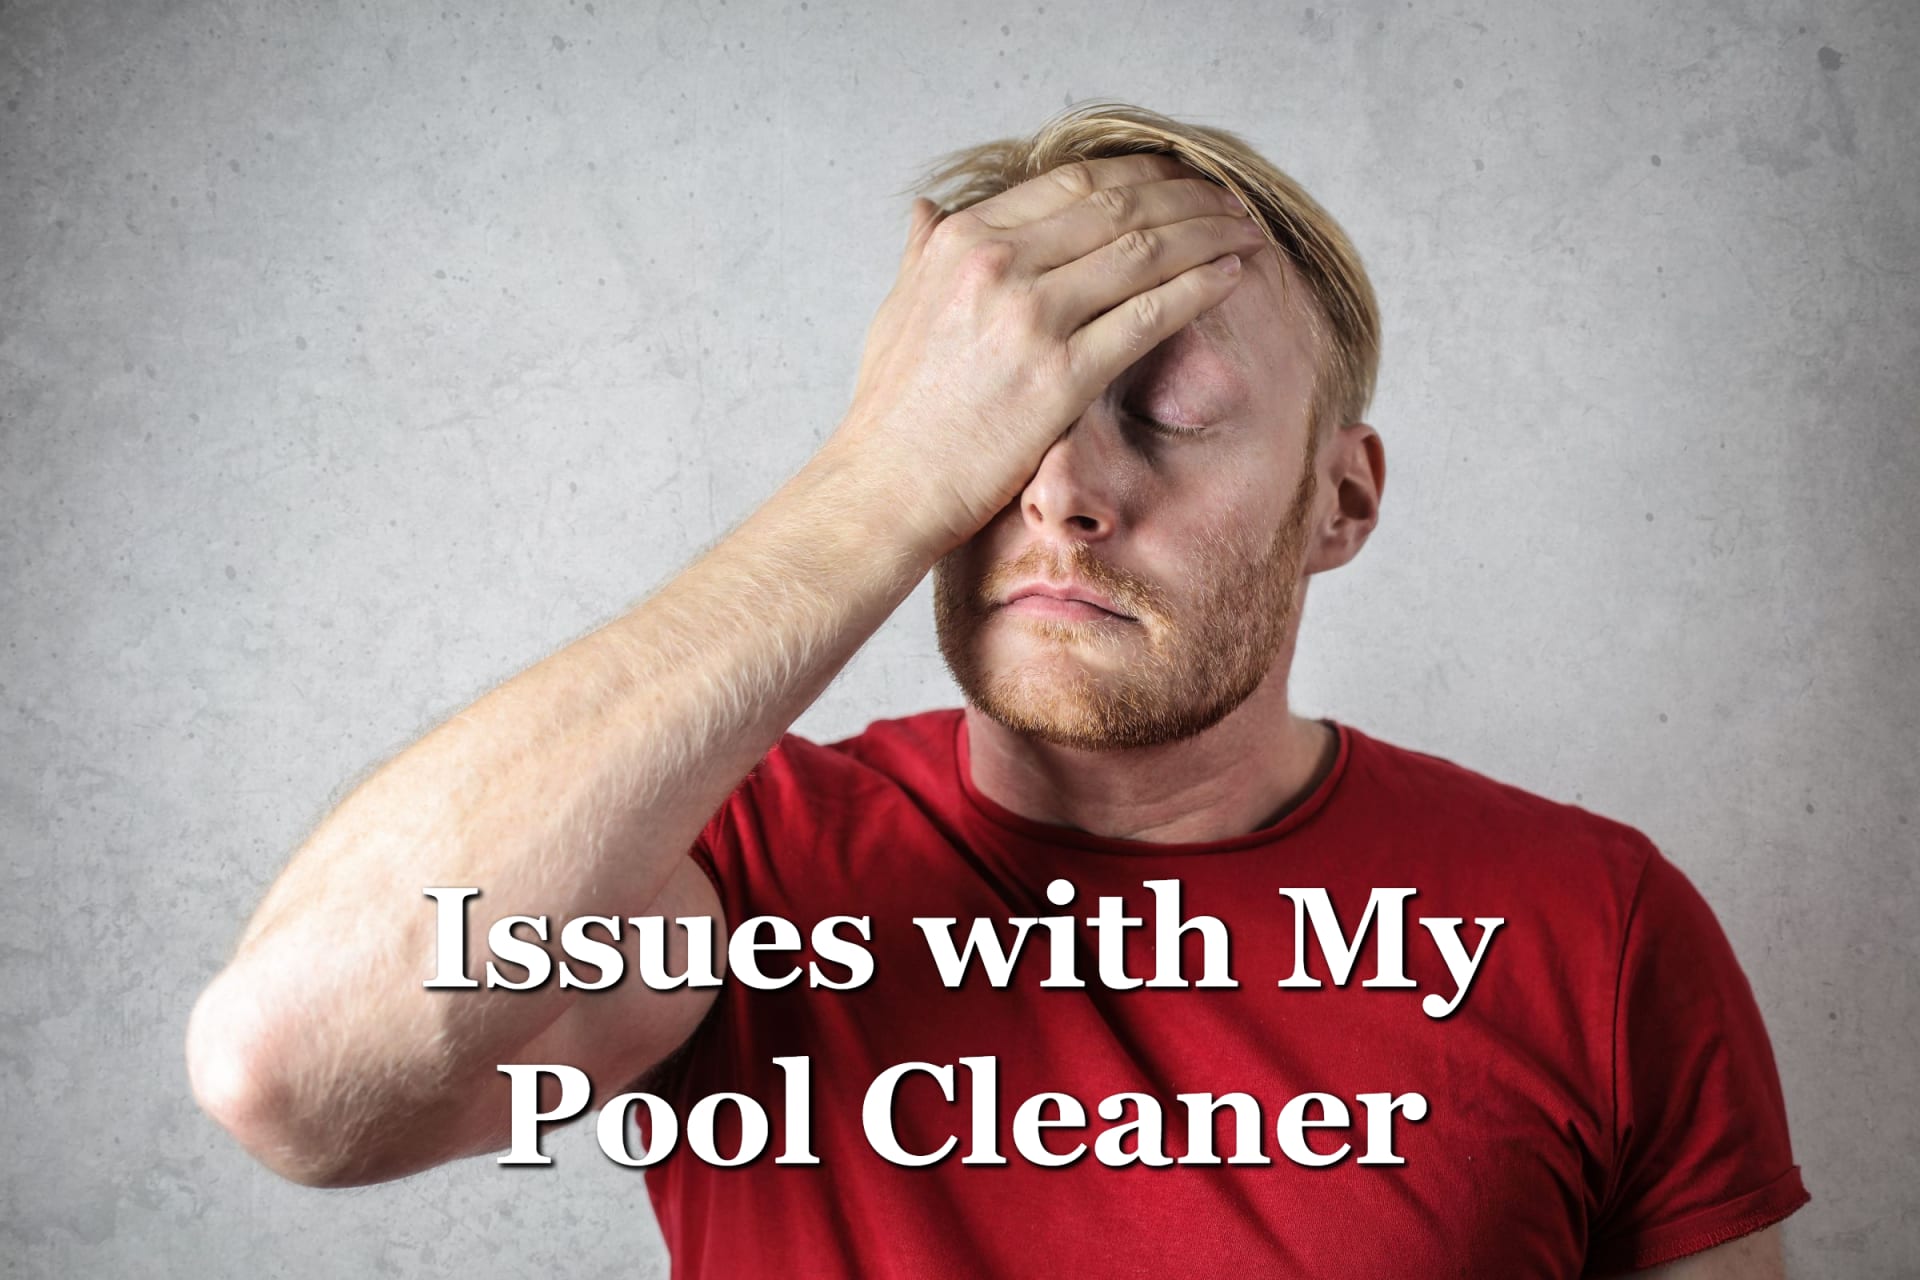 A man frustrated because he is having issues with his pool cleaner.